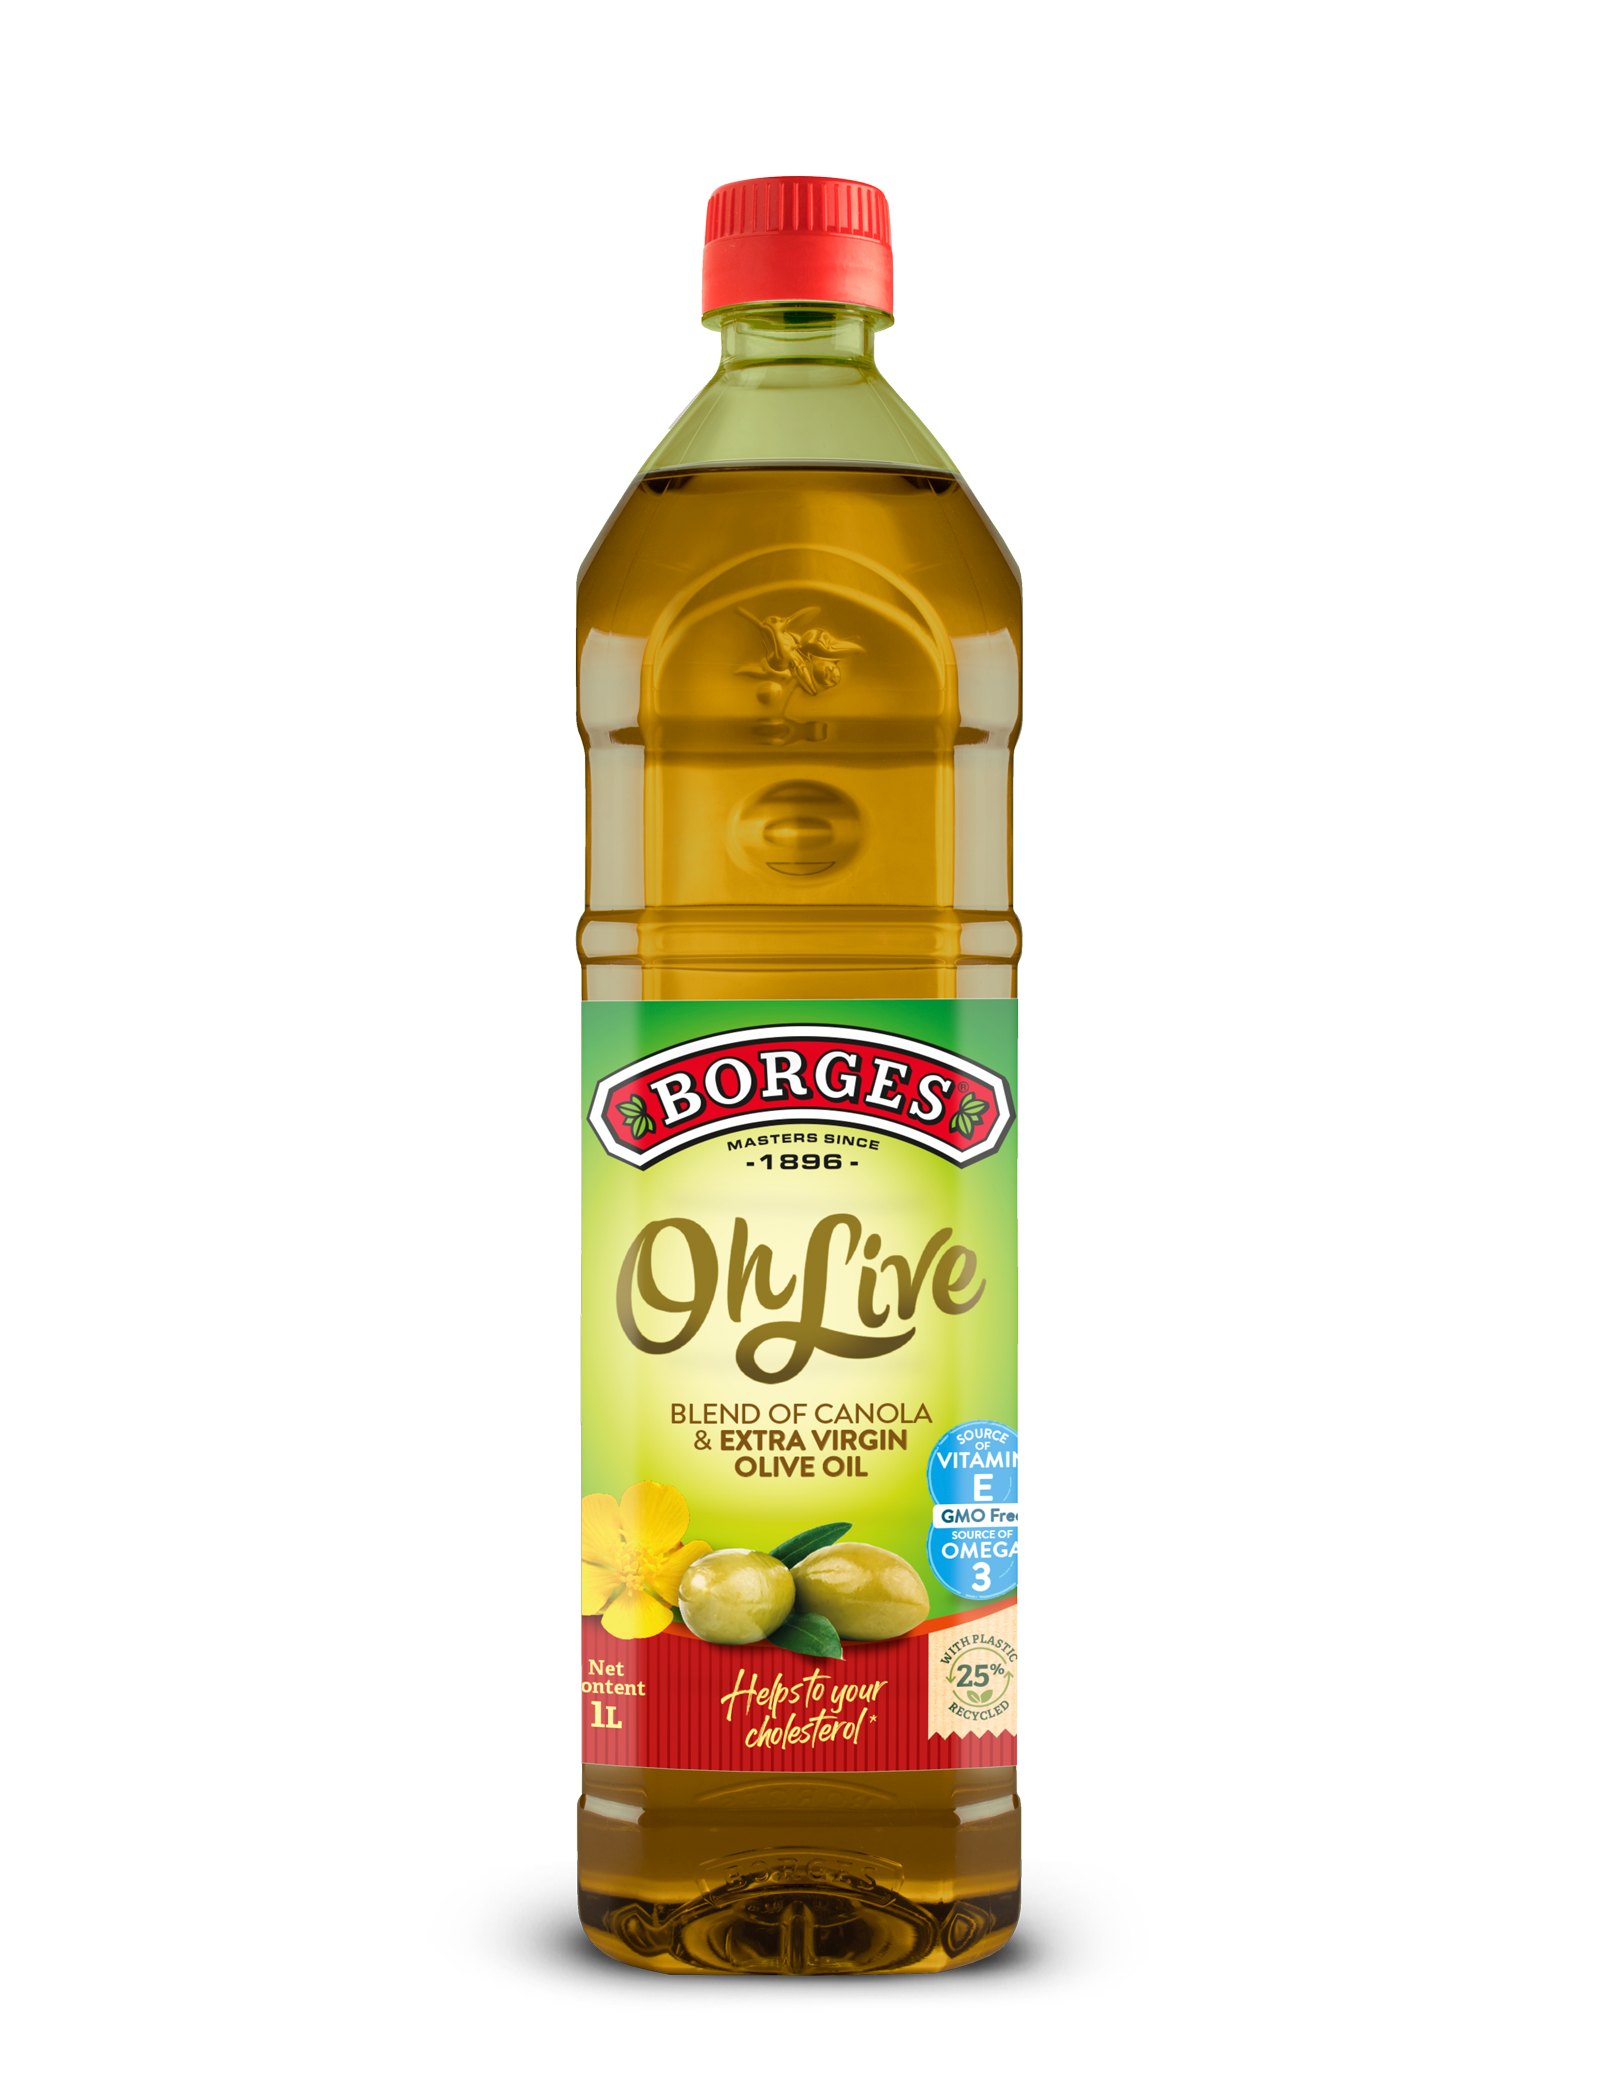 Borges oh live canola and extra virgin olive oil